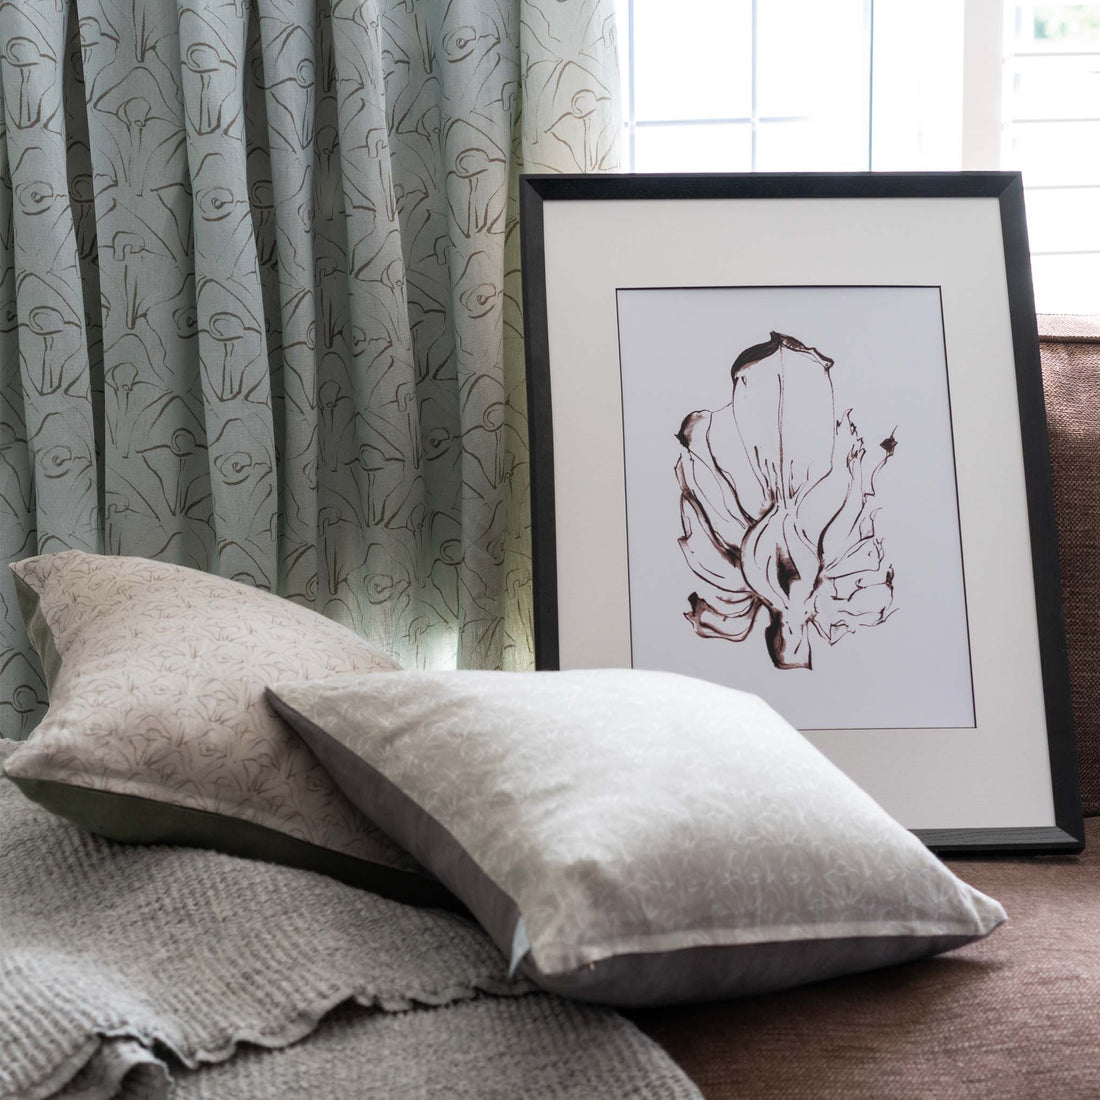 A woodland walk inspired our new fabric range!